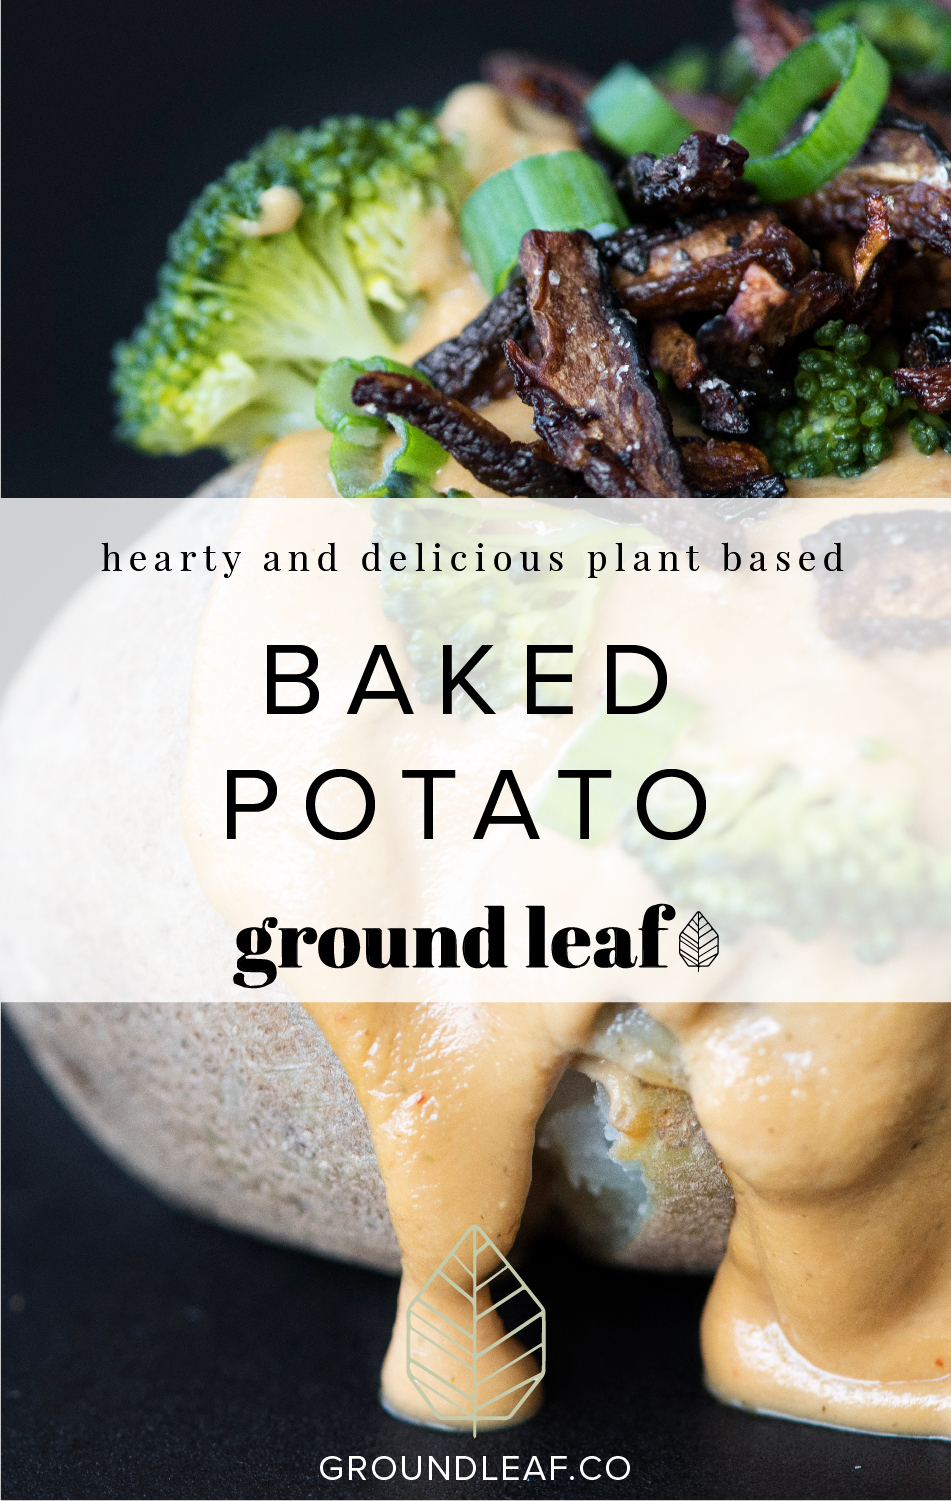 Learn how to make delicious and hearty vegan baked potatoes in the instant pot.